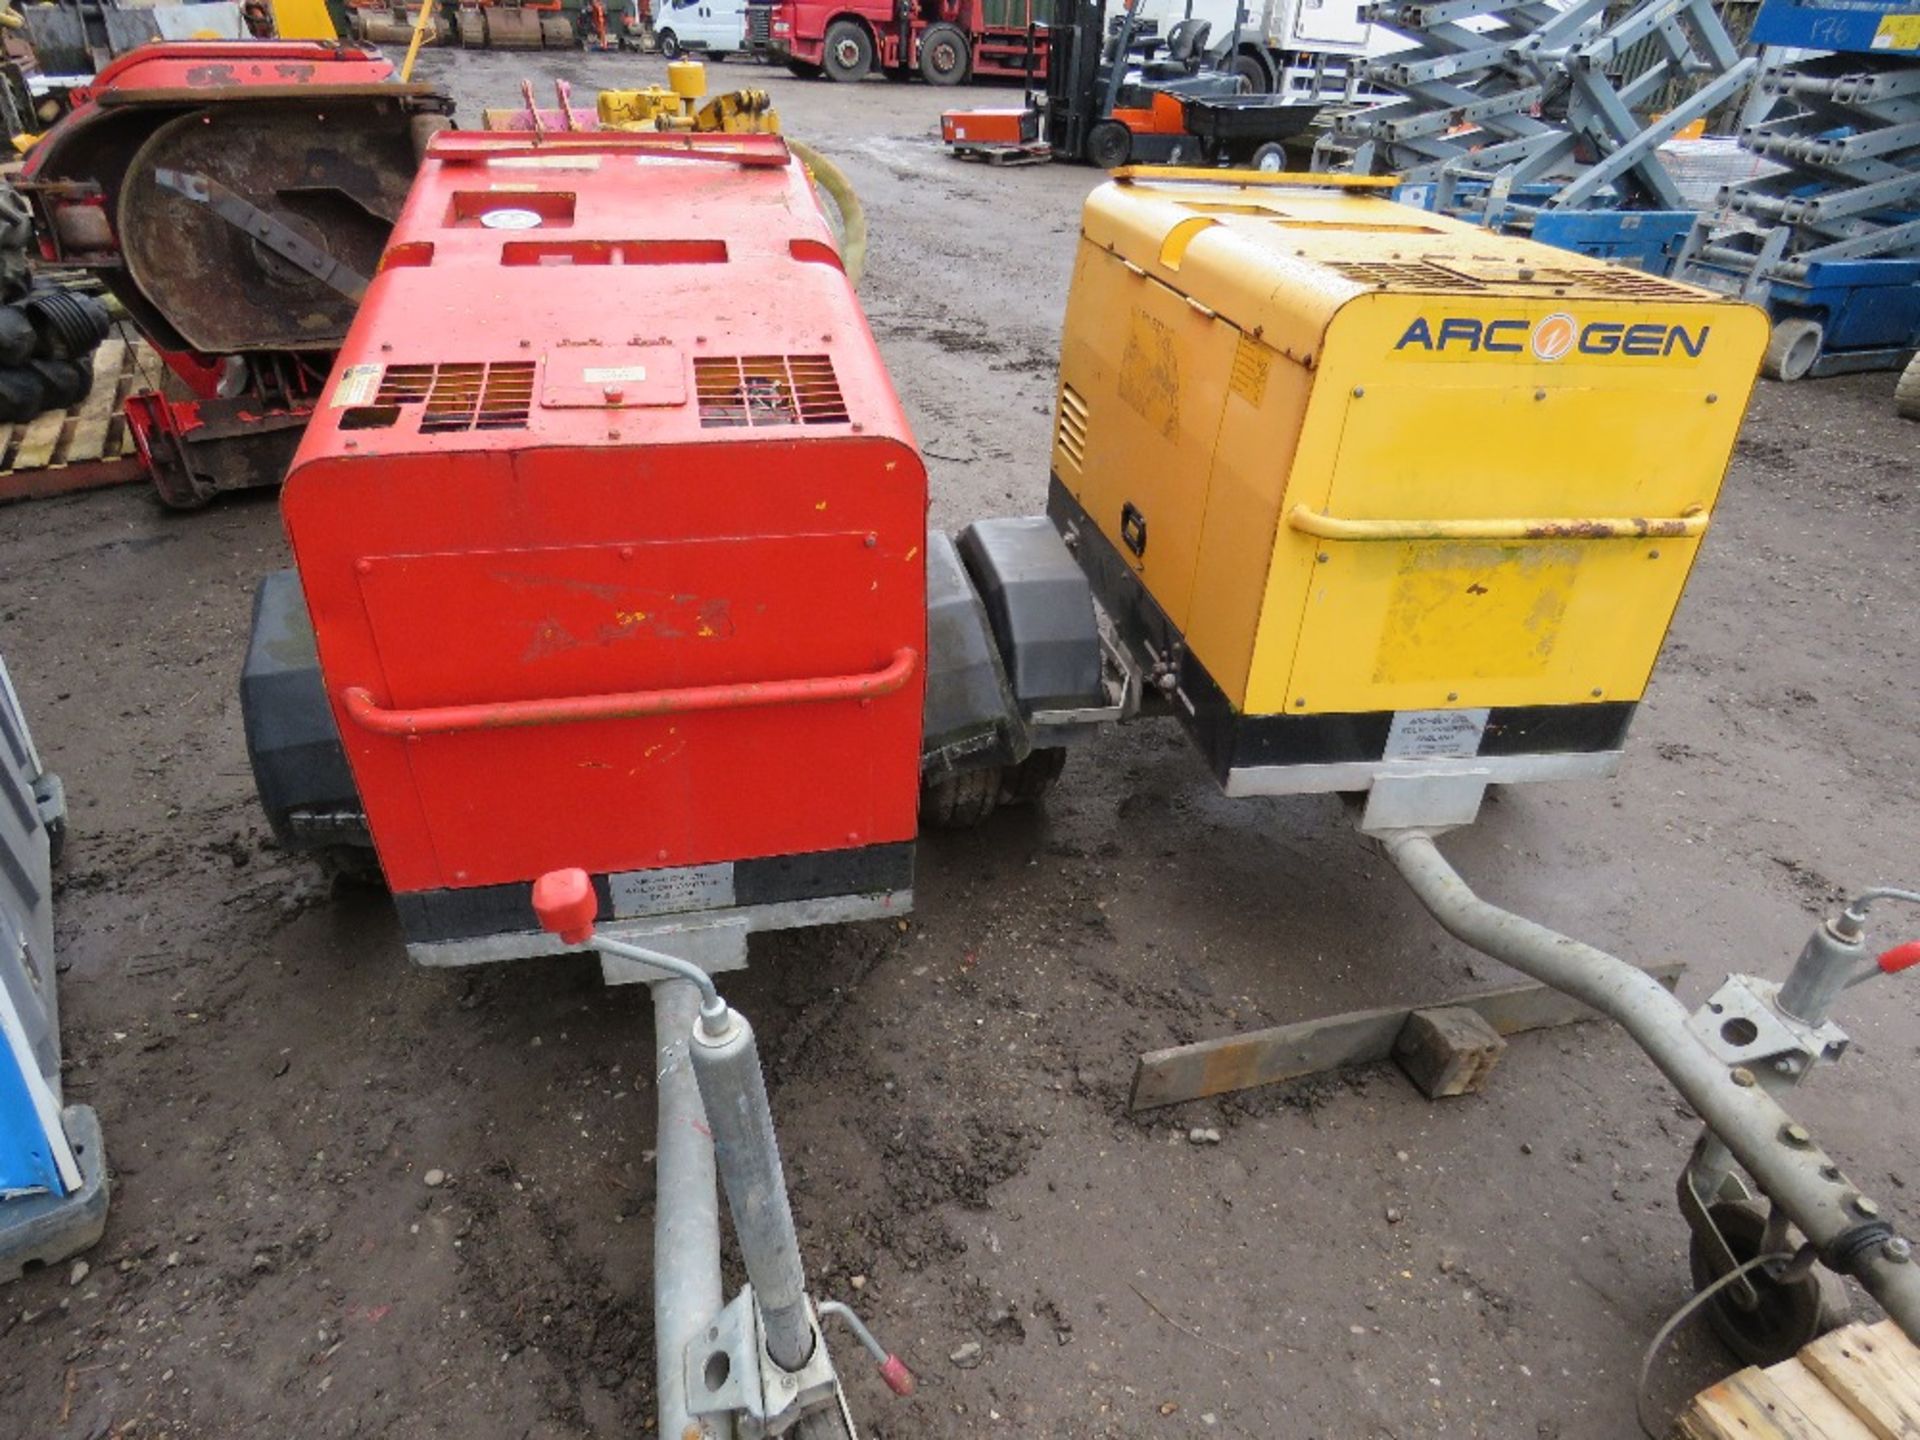 ARCGEN 300AVC TOWED WELDING PLANT. RED COLOURED, YEAR 2009 BUILD. SN:1302142. WHEN TESTED WAS SEEN T - Image 4 of 4